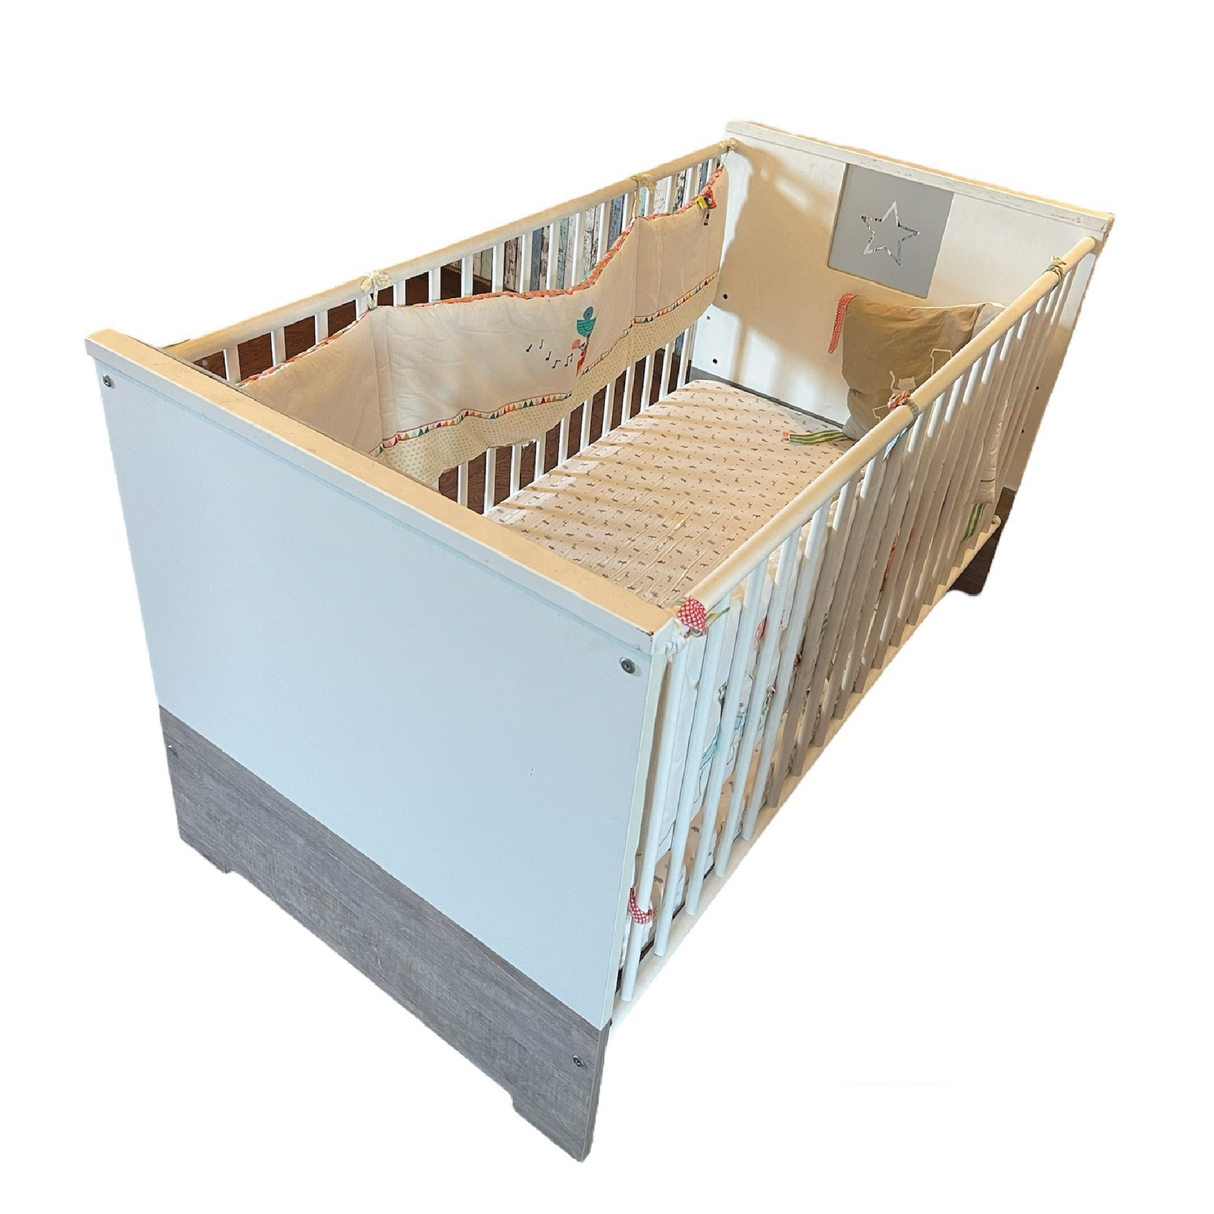 A Second Chance - Baby Crib and Mattress Babies